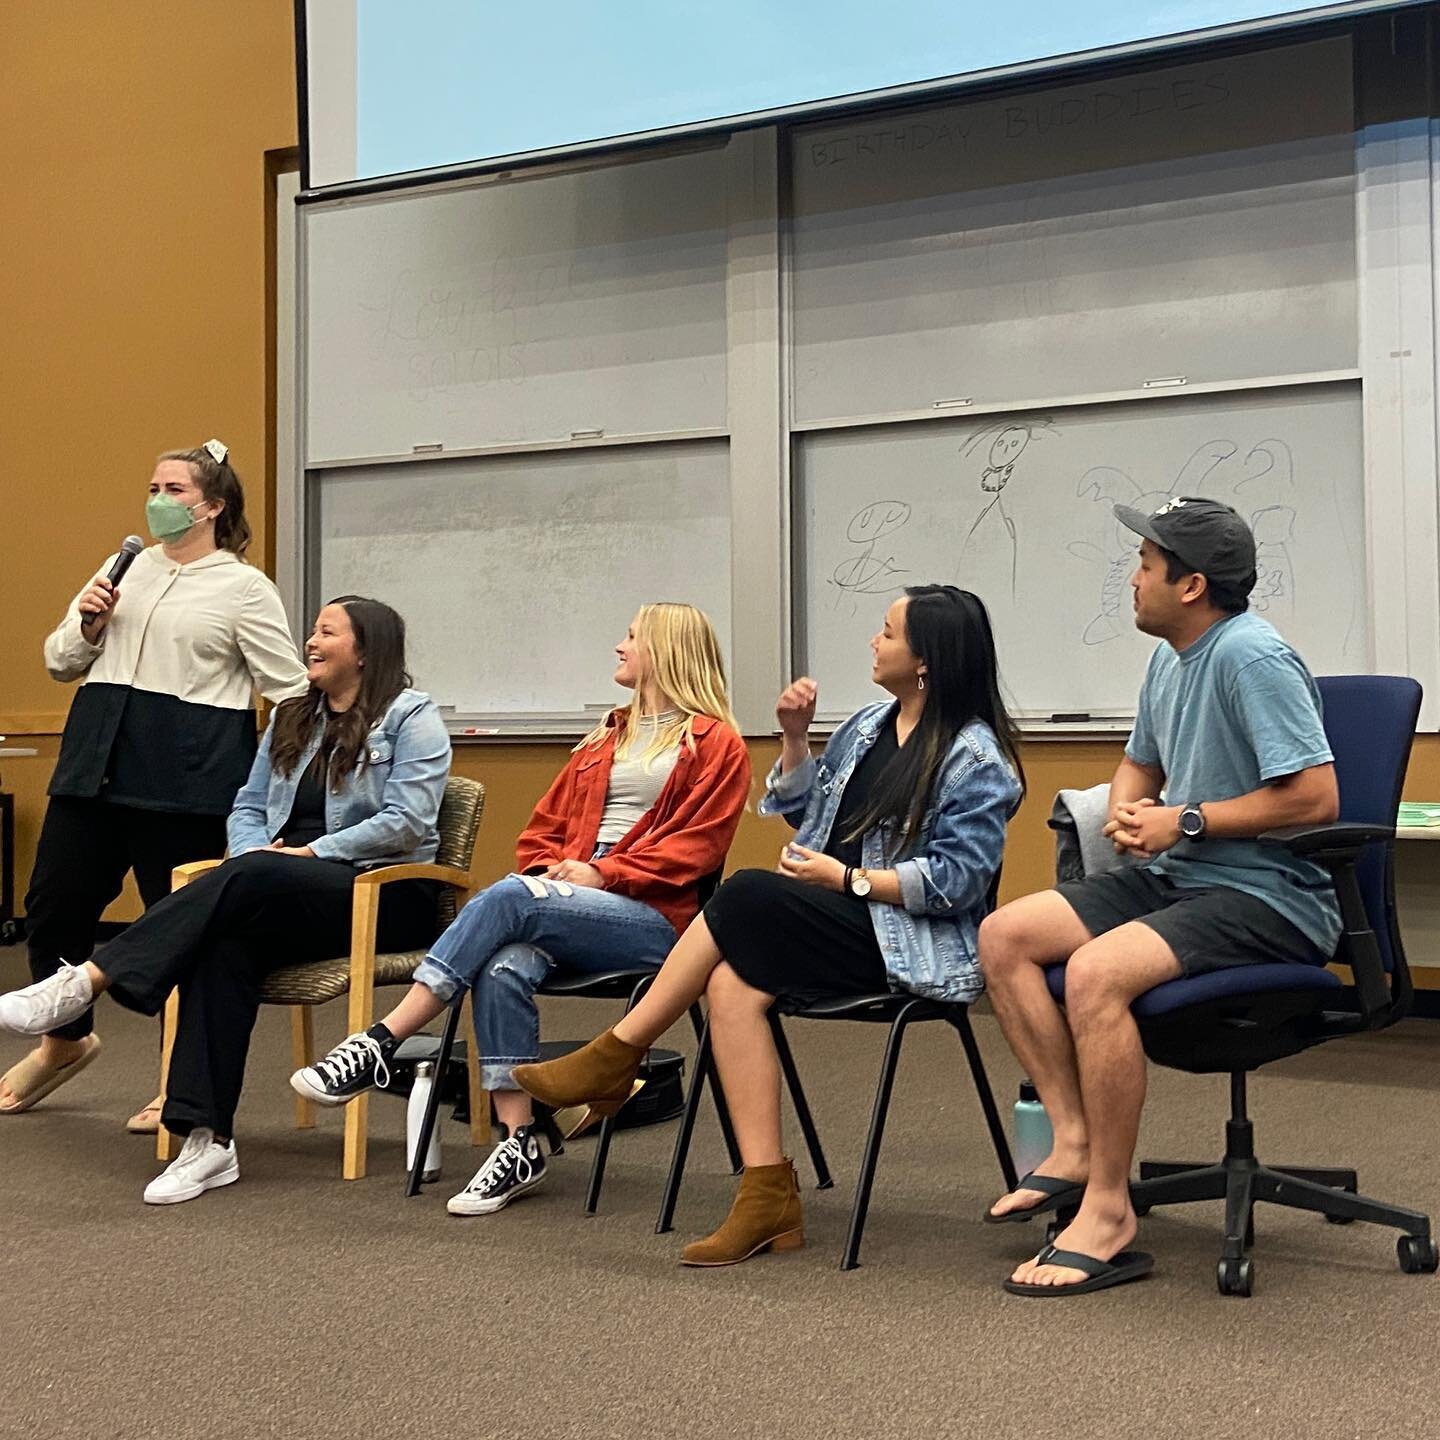 Thank you so much to our relationship panel for coming out to speak to us tonight! We really appreciate all of the helpful insight you shared about romantic relationships, friendships, and family relationships.